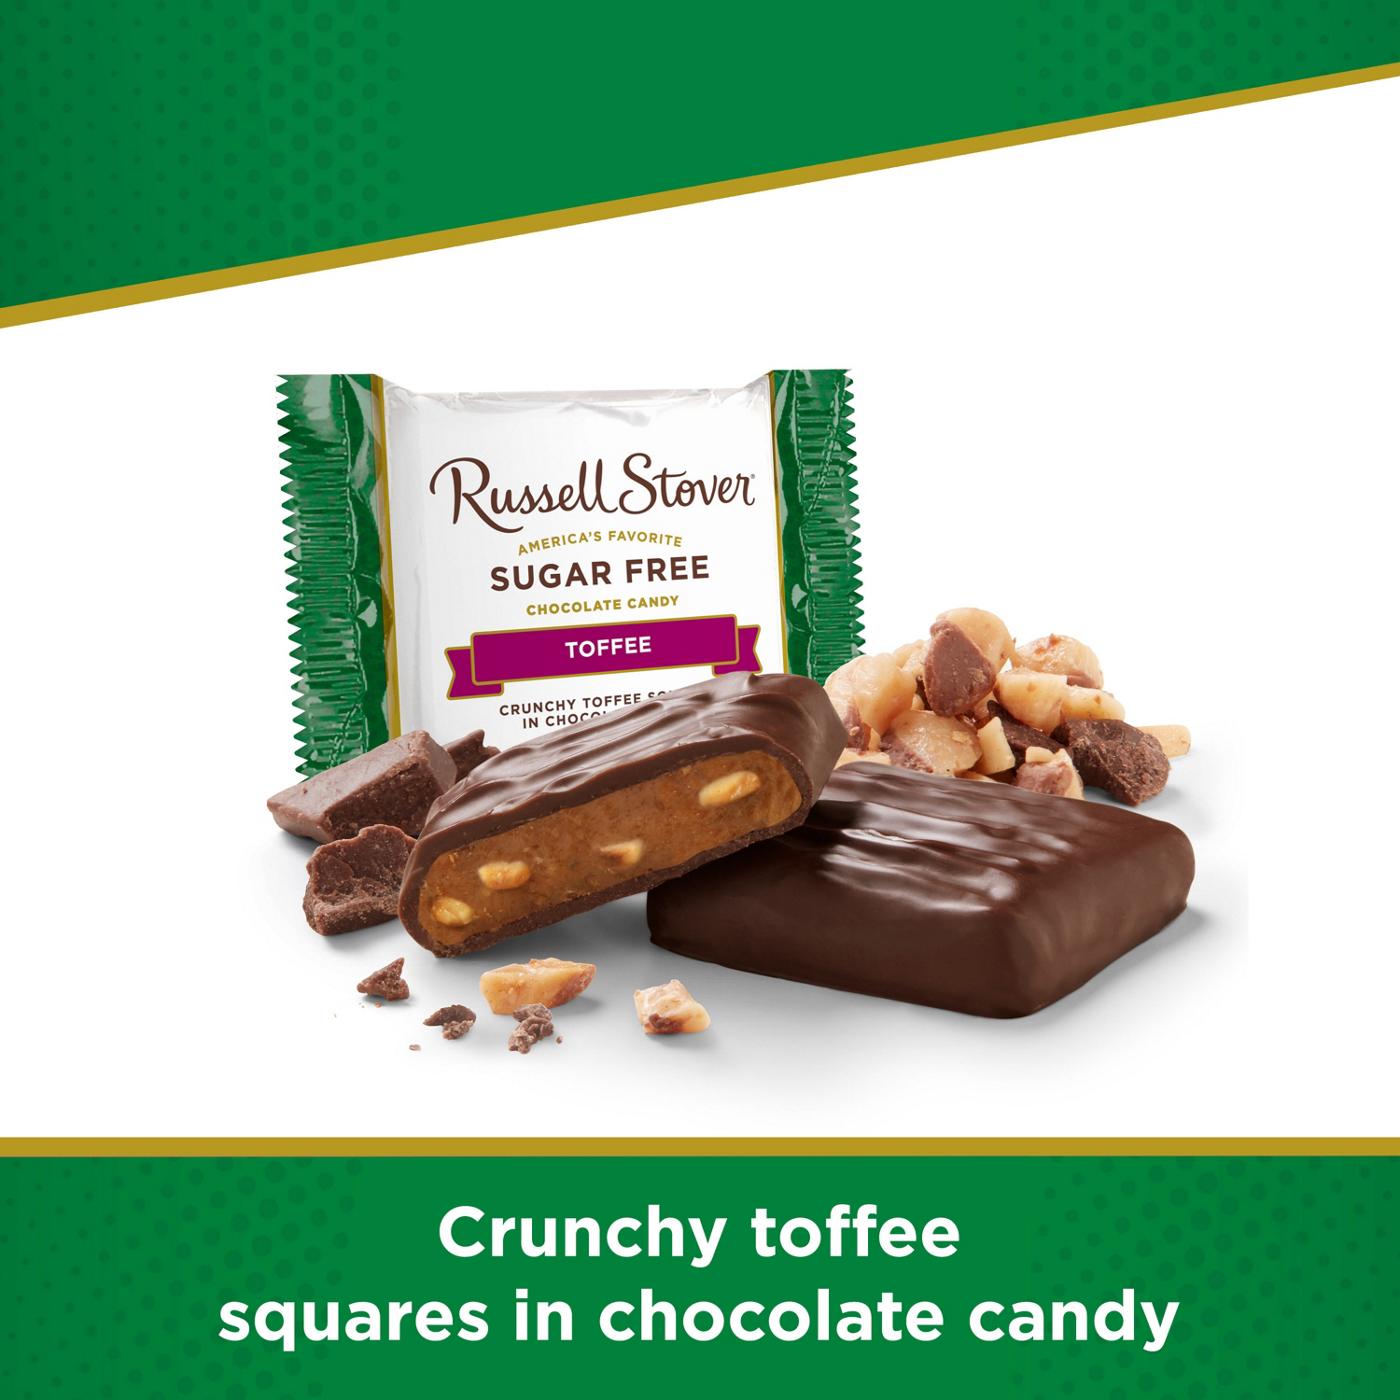 Russell Stover Sugar Free Toffee Squares; image 8 of 8